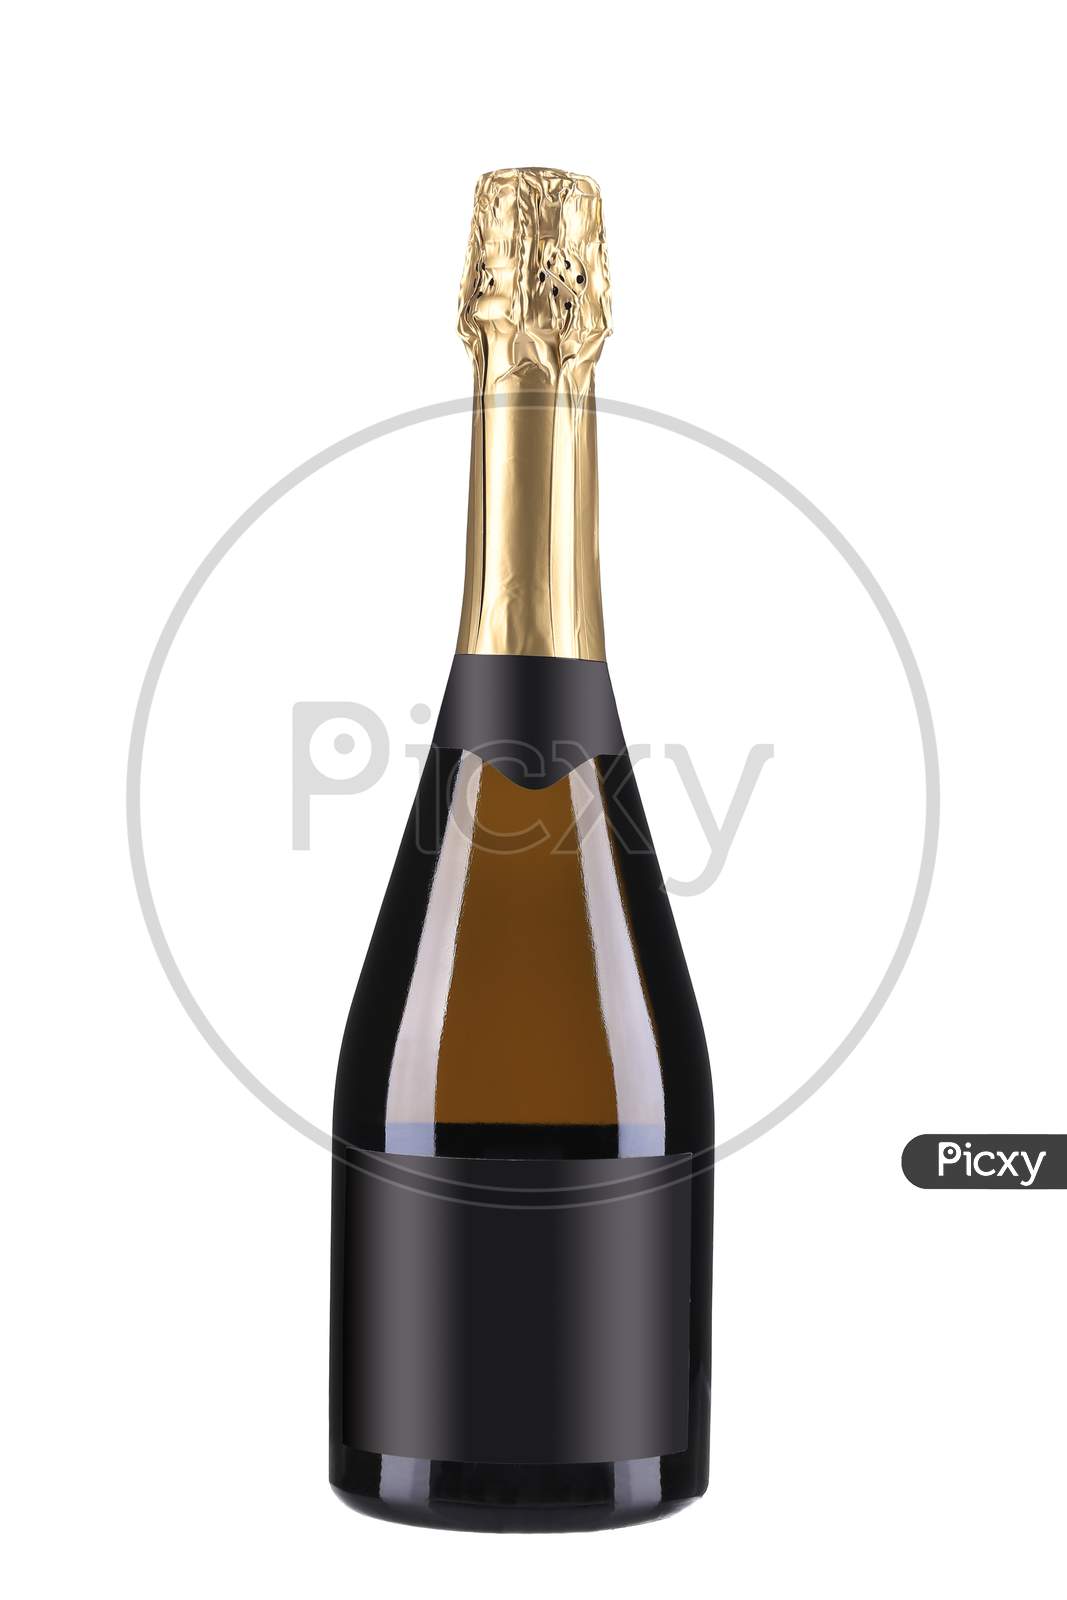 Bottle Of Champagne. Isolated On A White Background.